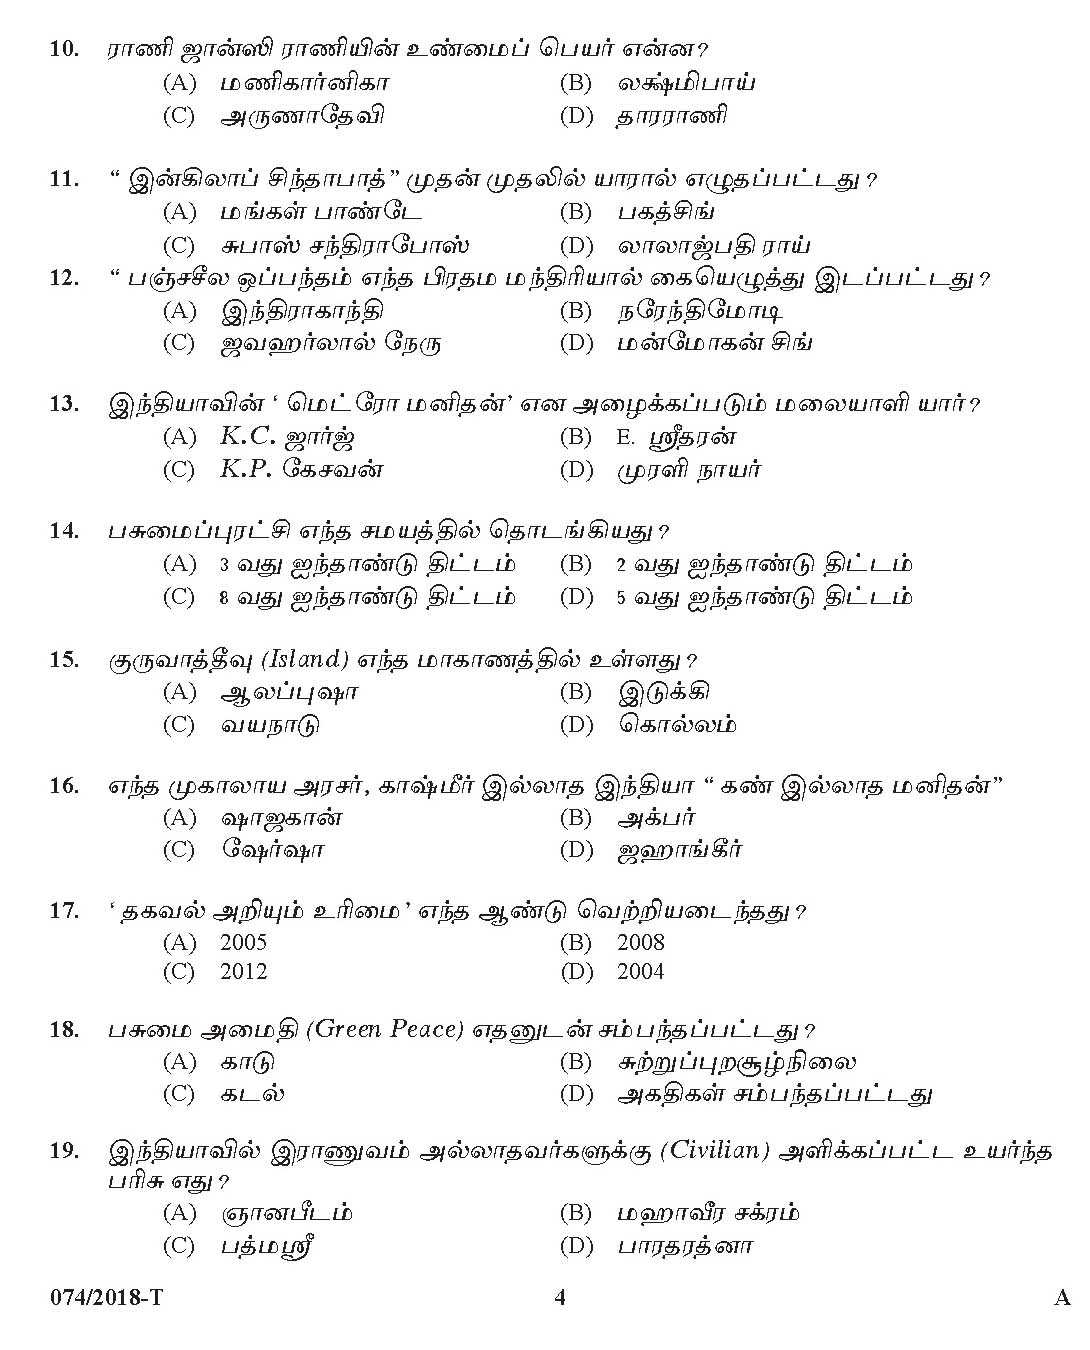 Kerala PSC Police Constable Driver Exam 2018 Question Paper Code 0742018 T 3